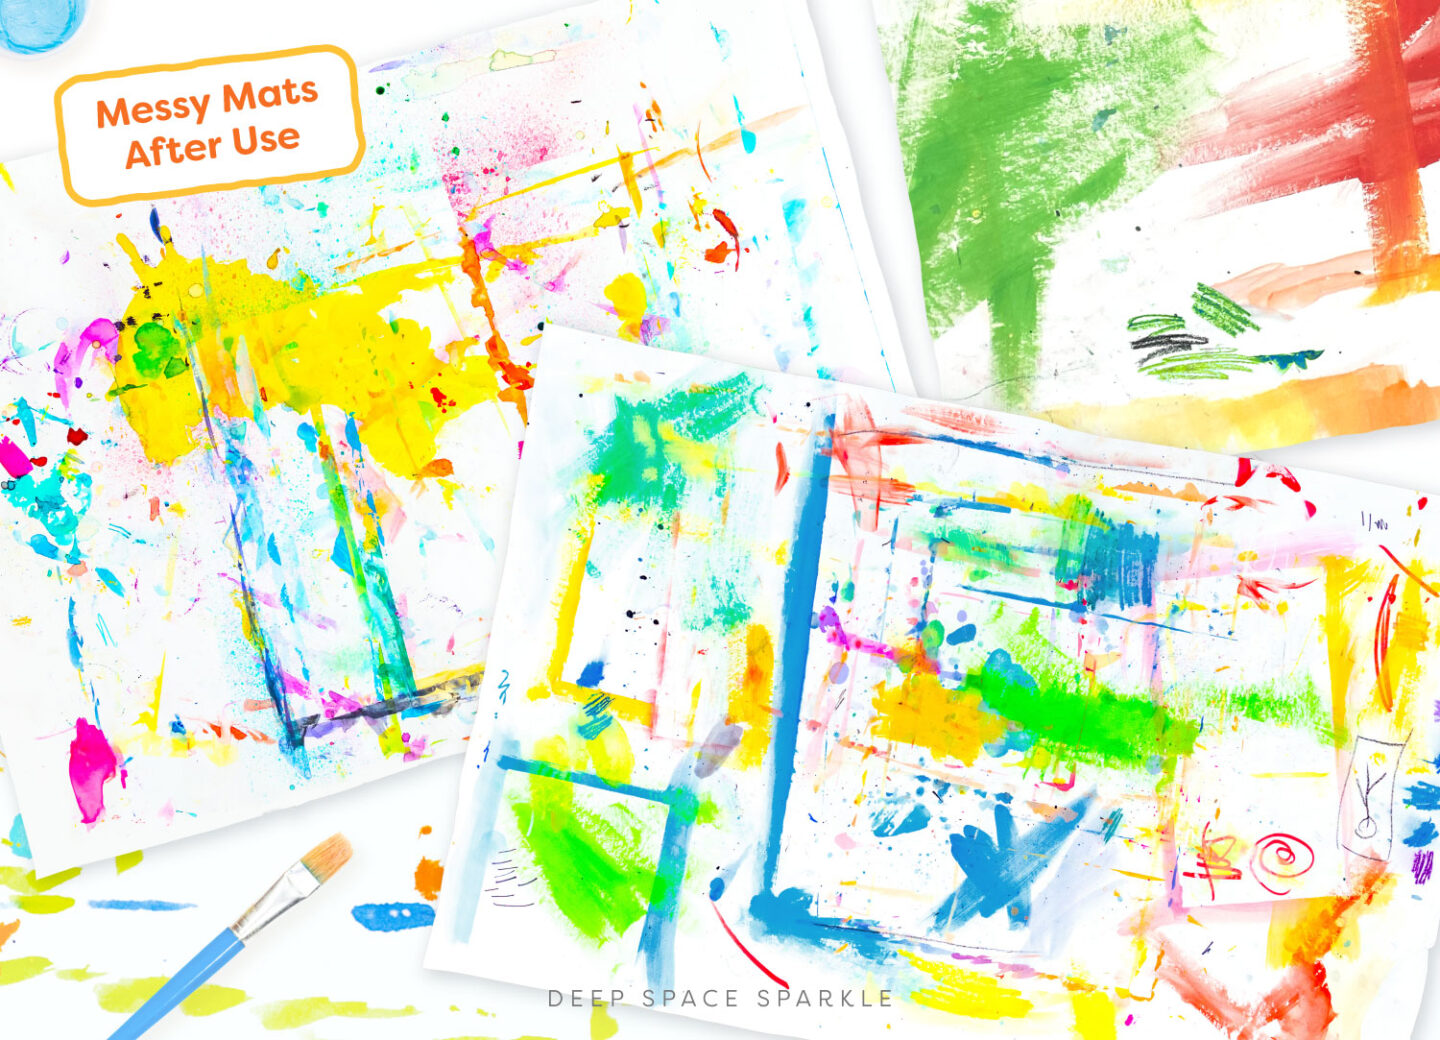 How to Make Messy Mats